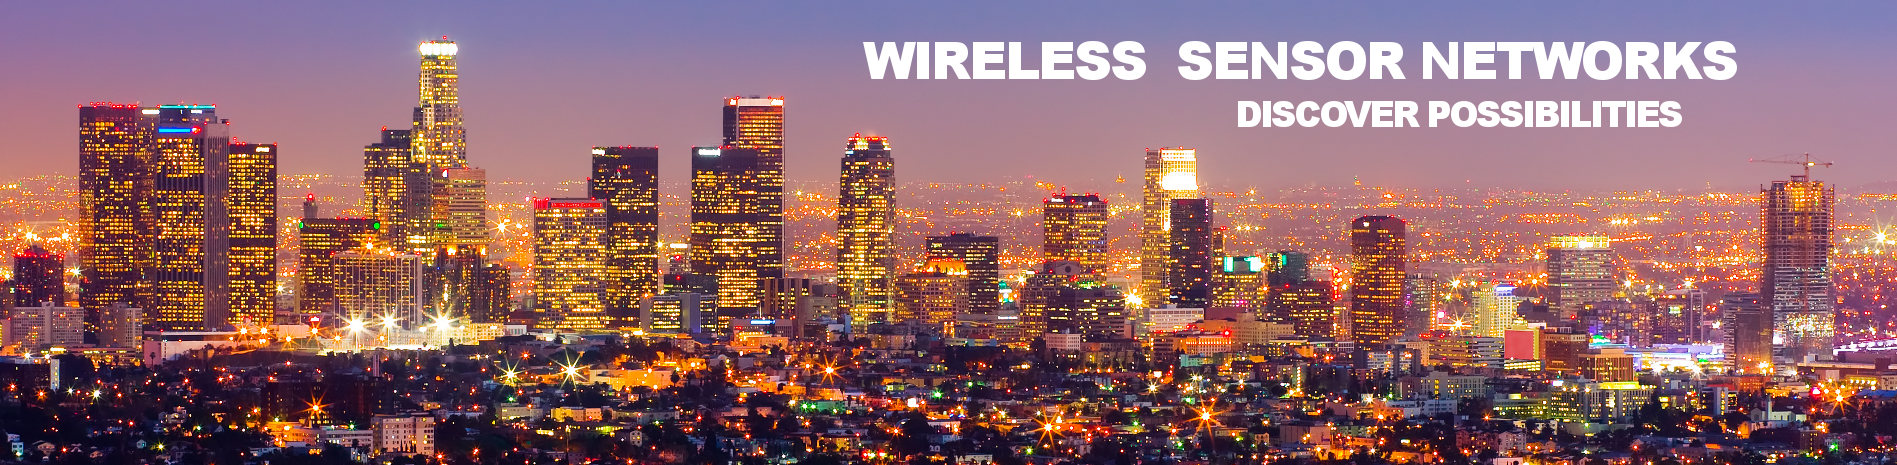 RPE is local to Los Angeles and plans to help it become an intelligent and wirelessly automated smart city.